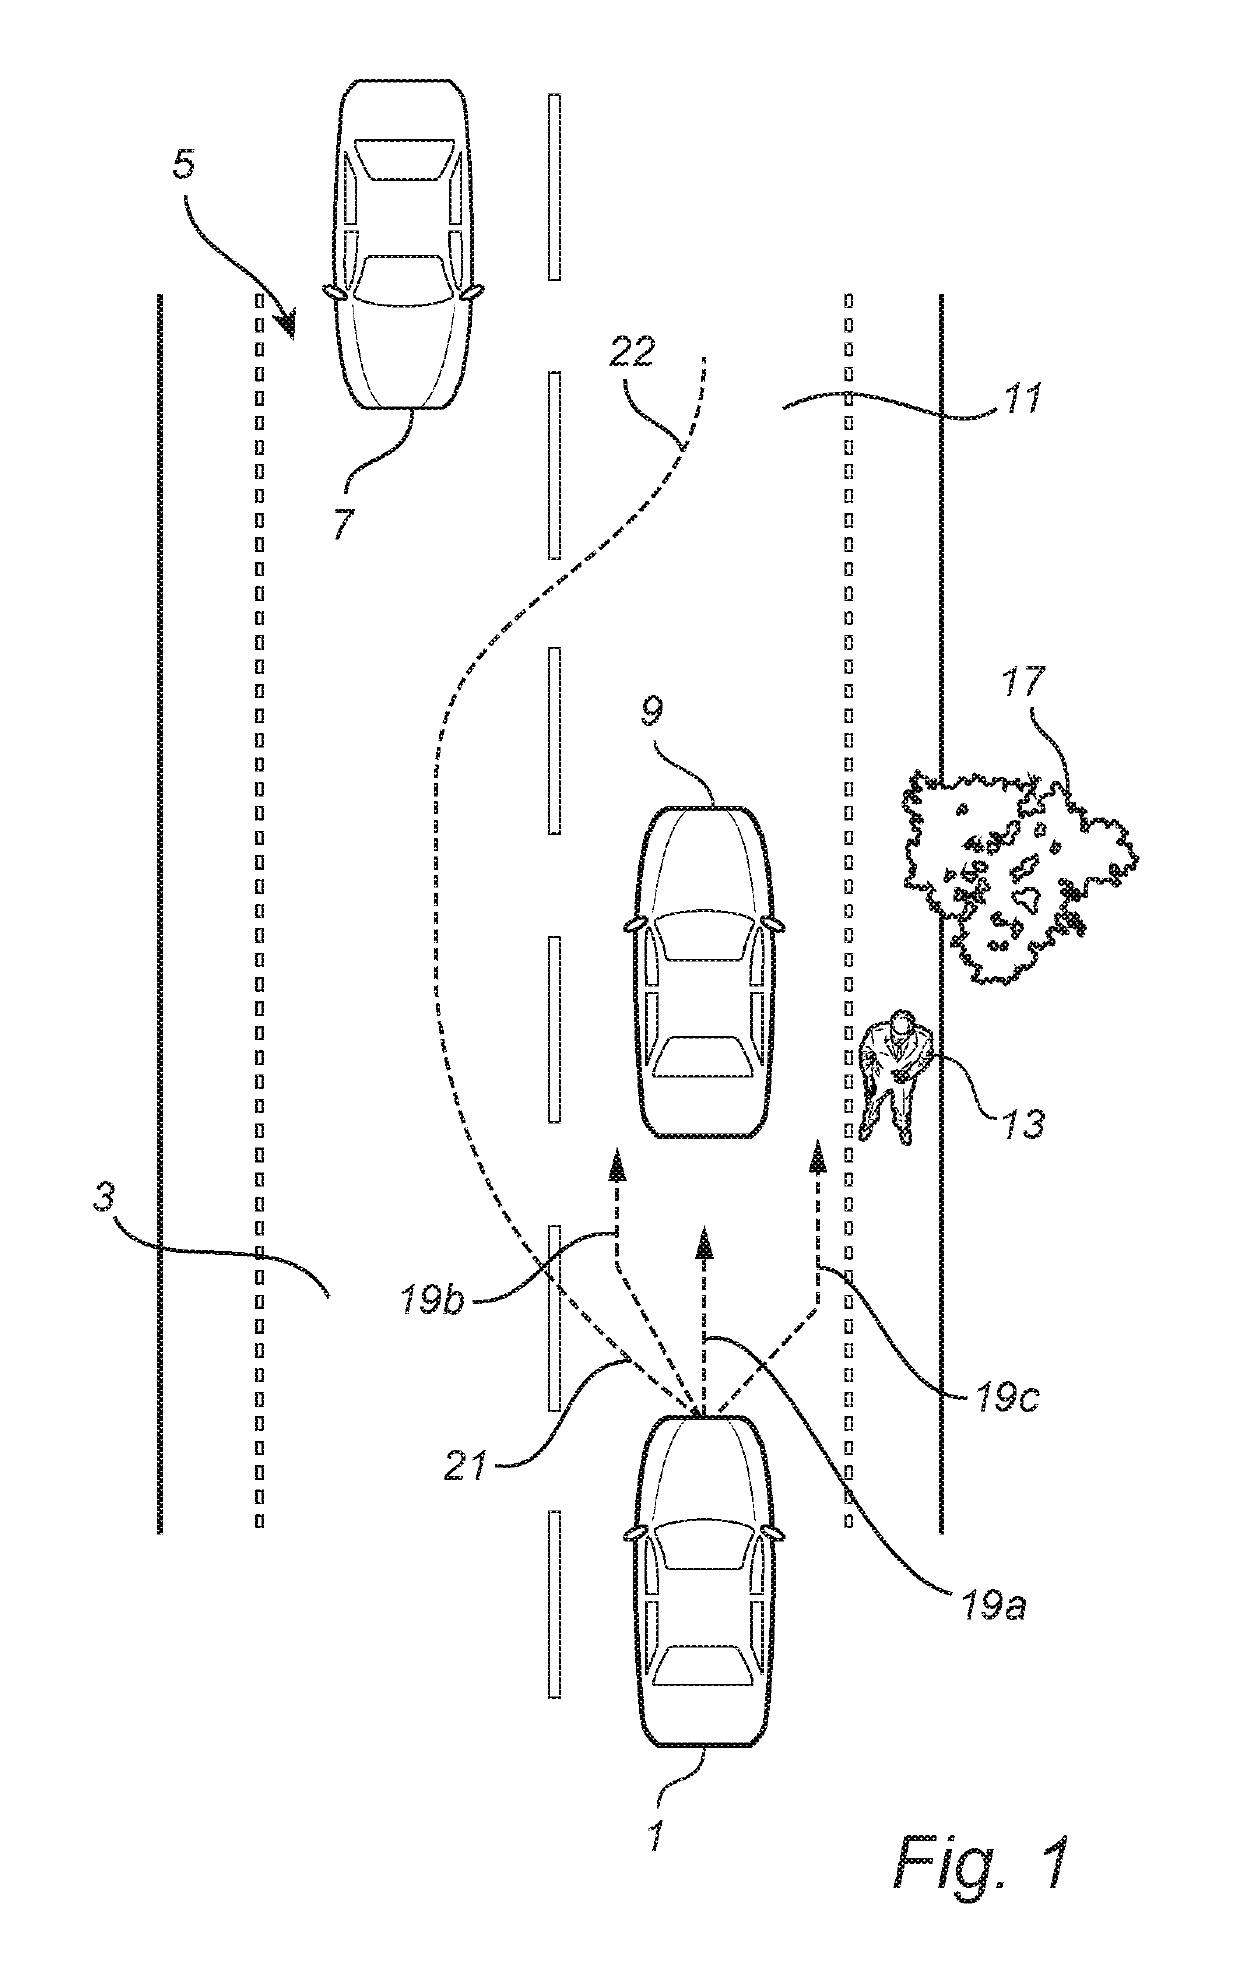 Driving intervention in vehicles